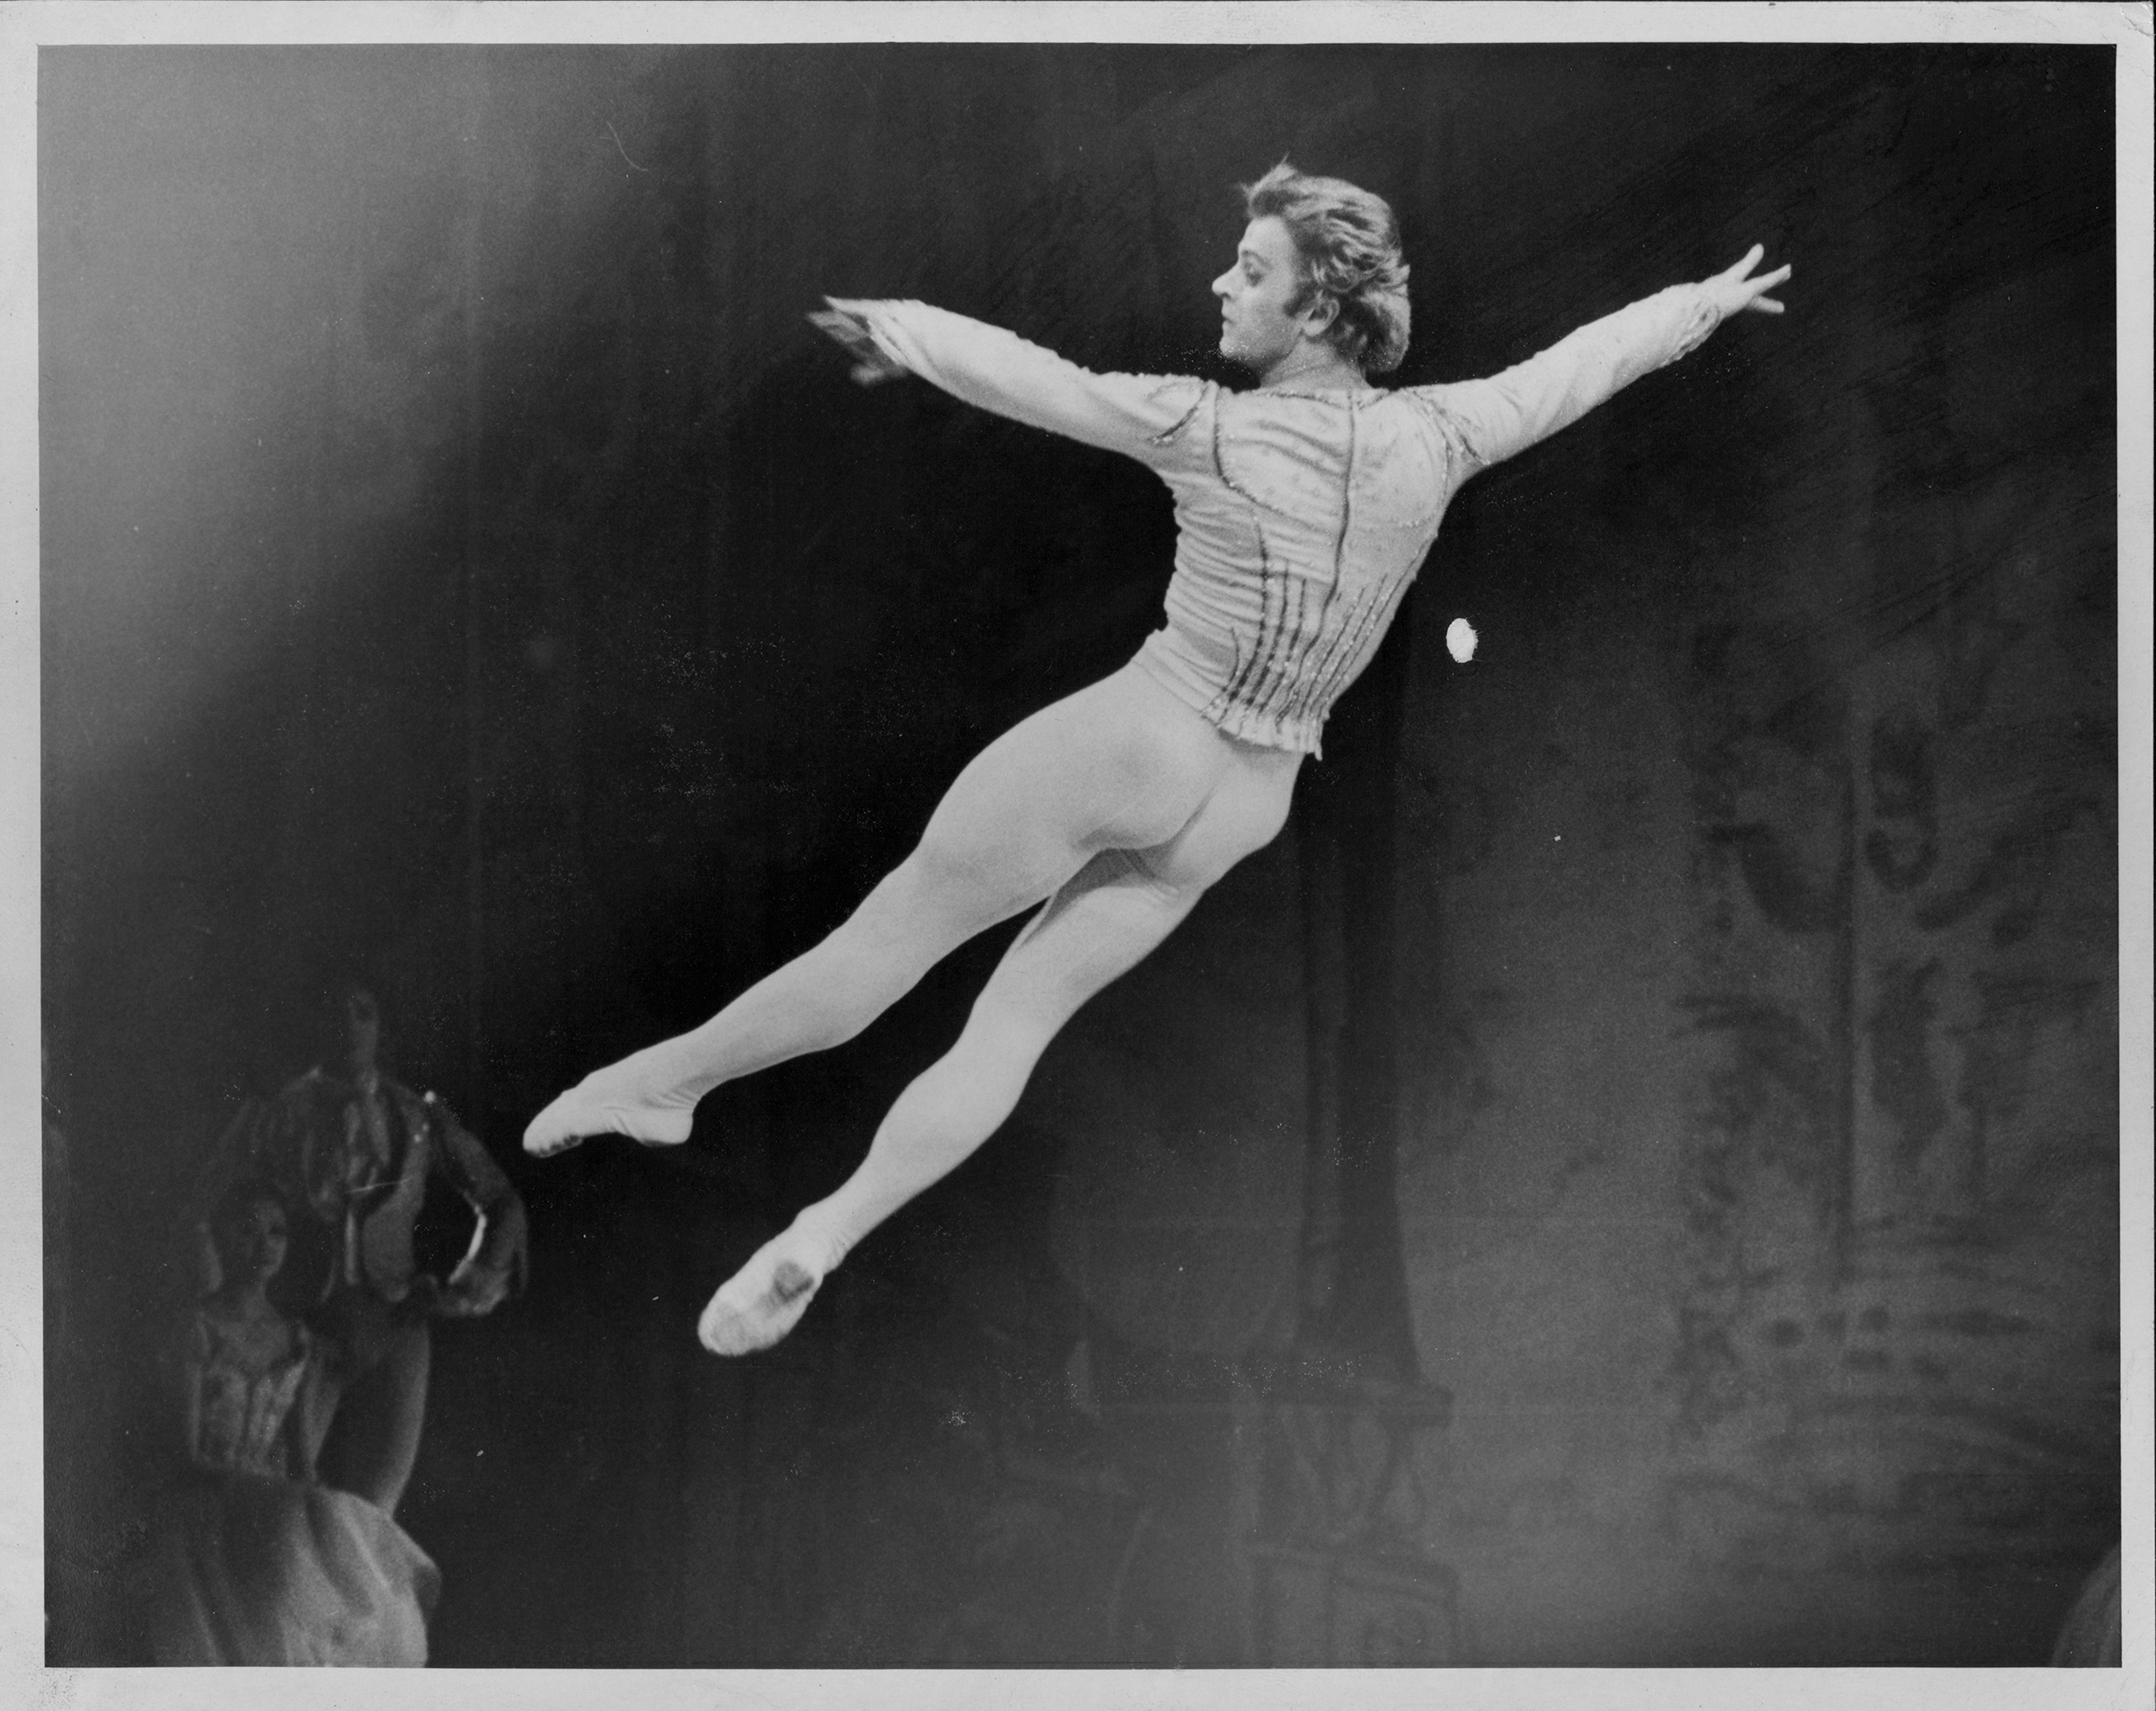 Mikhail Baryshnikov in the air during the premier of the Nutcracker at New York City's Metropolitan Opera House, May 1977